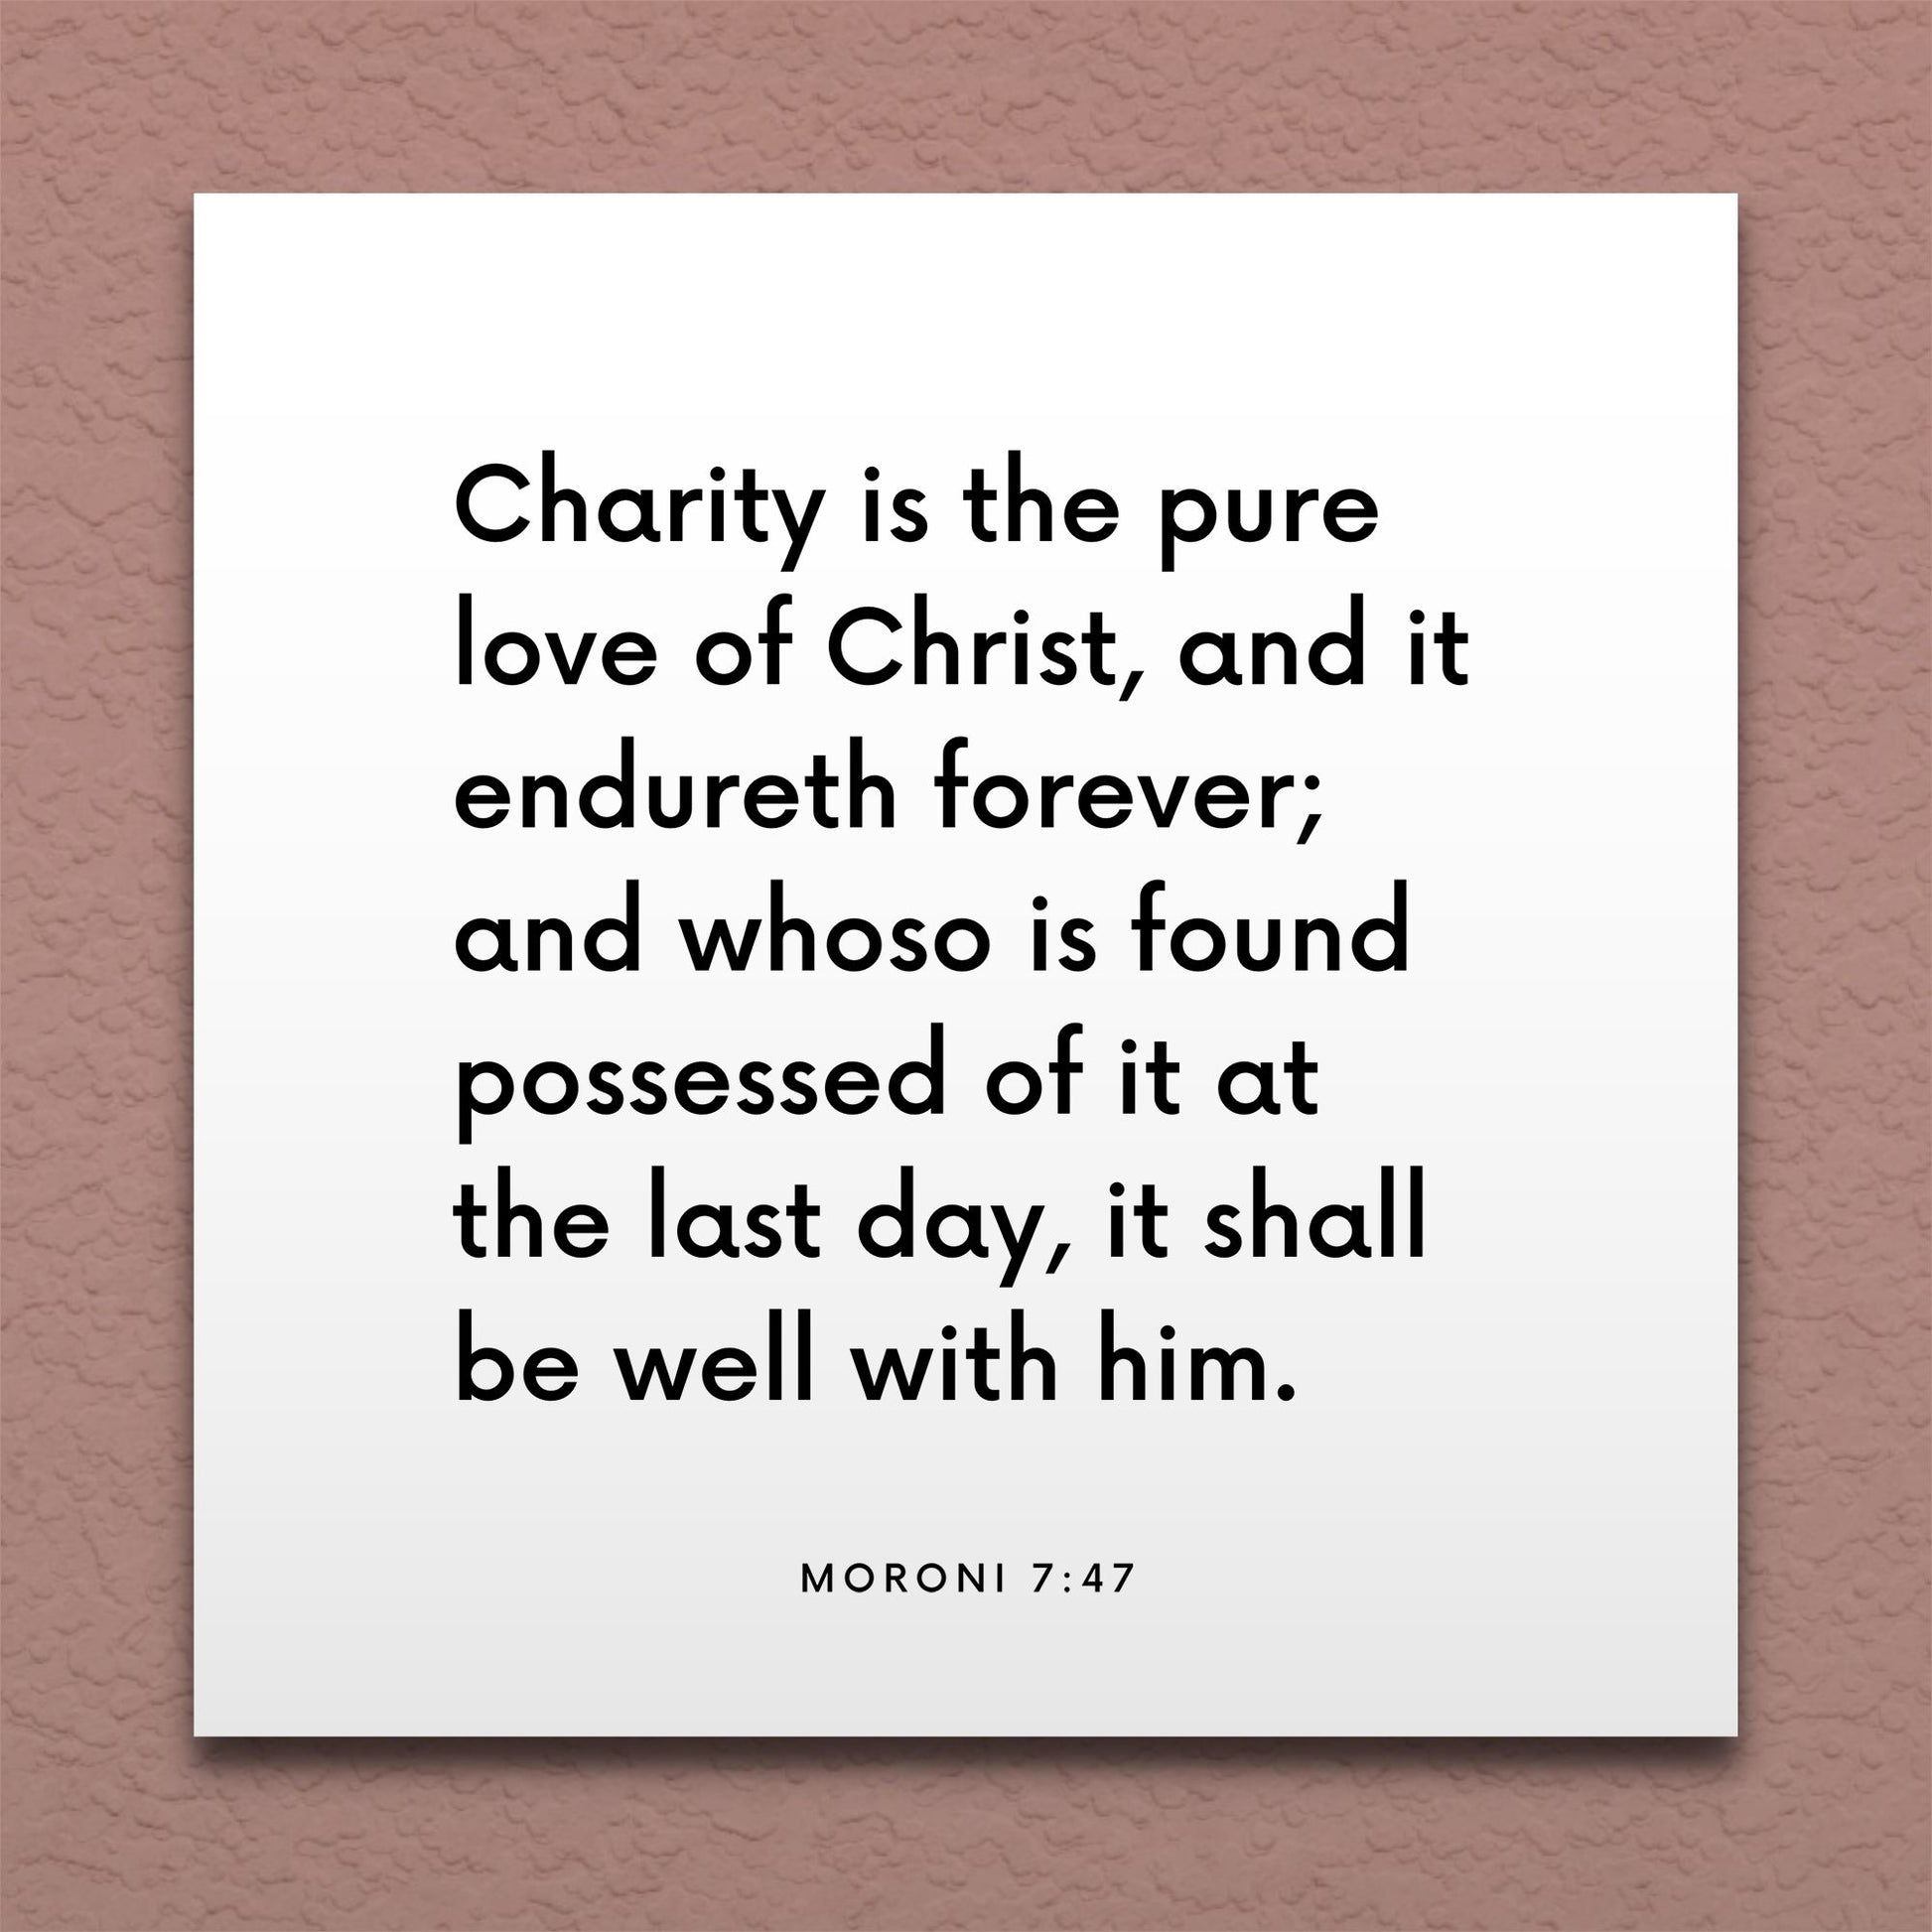 Wall-mounted scripture tile for Moroni 7:47 - "Charity is the pure love of Christ"